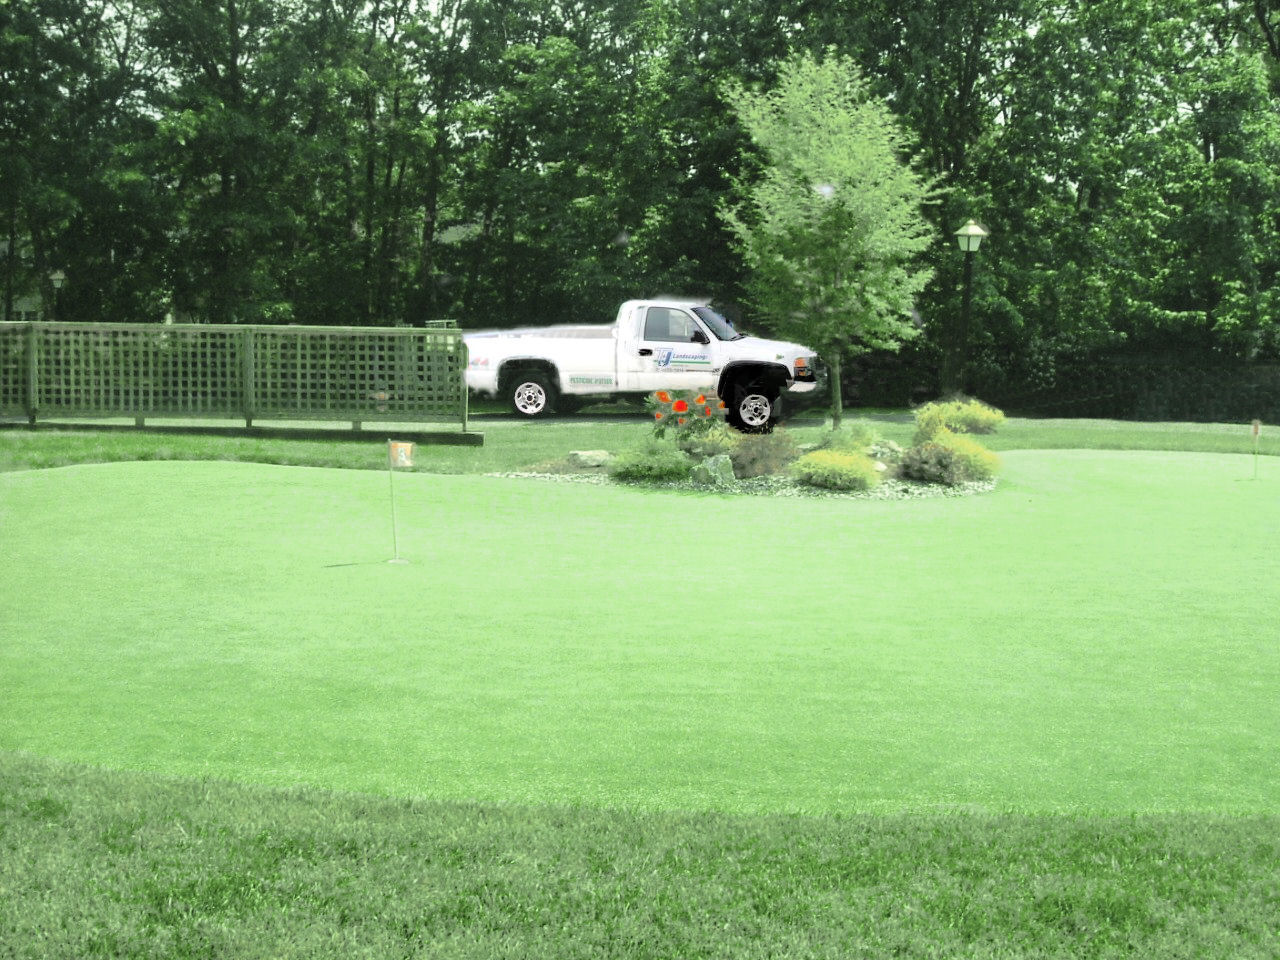 lawn service display on a putting green